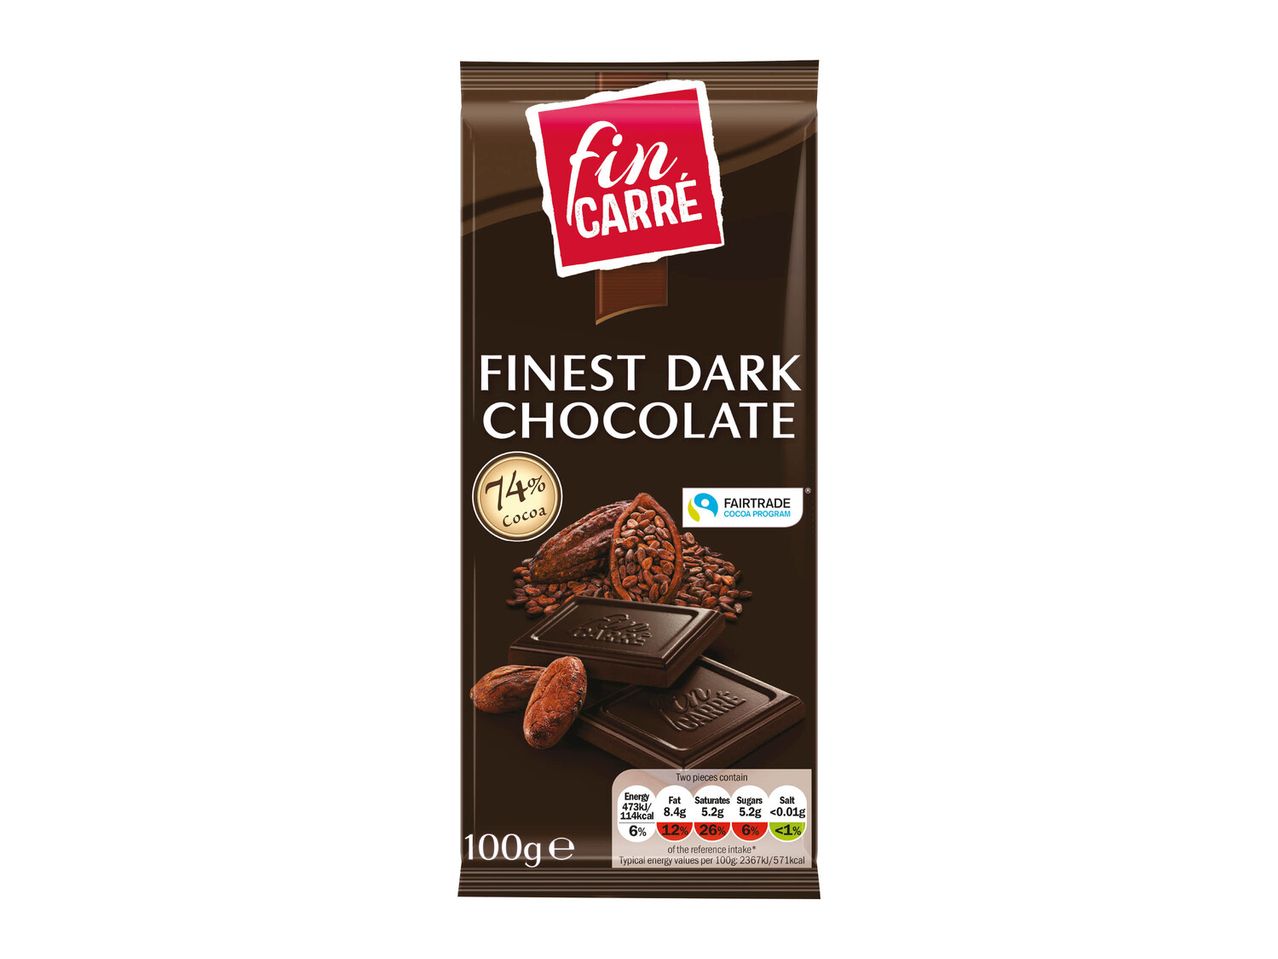 Go to full screen view: Fairtrade Chocolate - Image 12